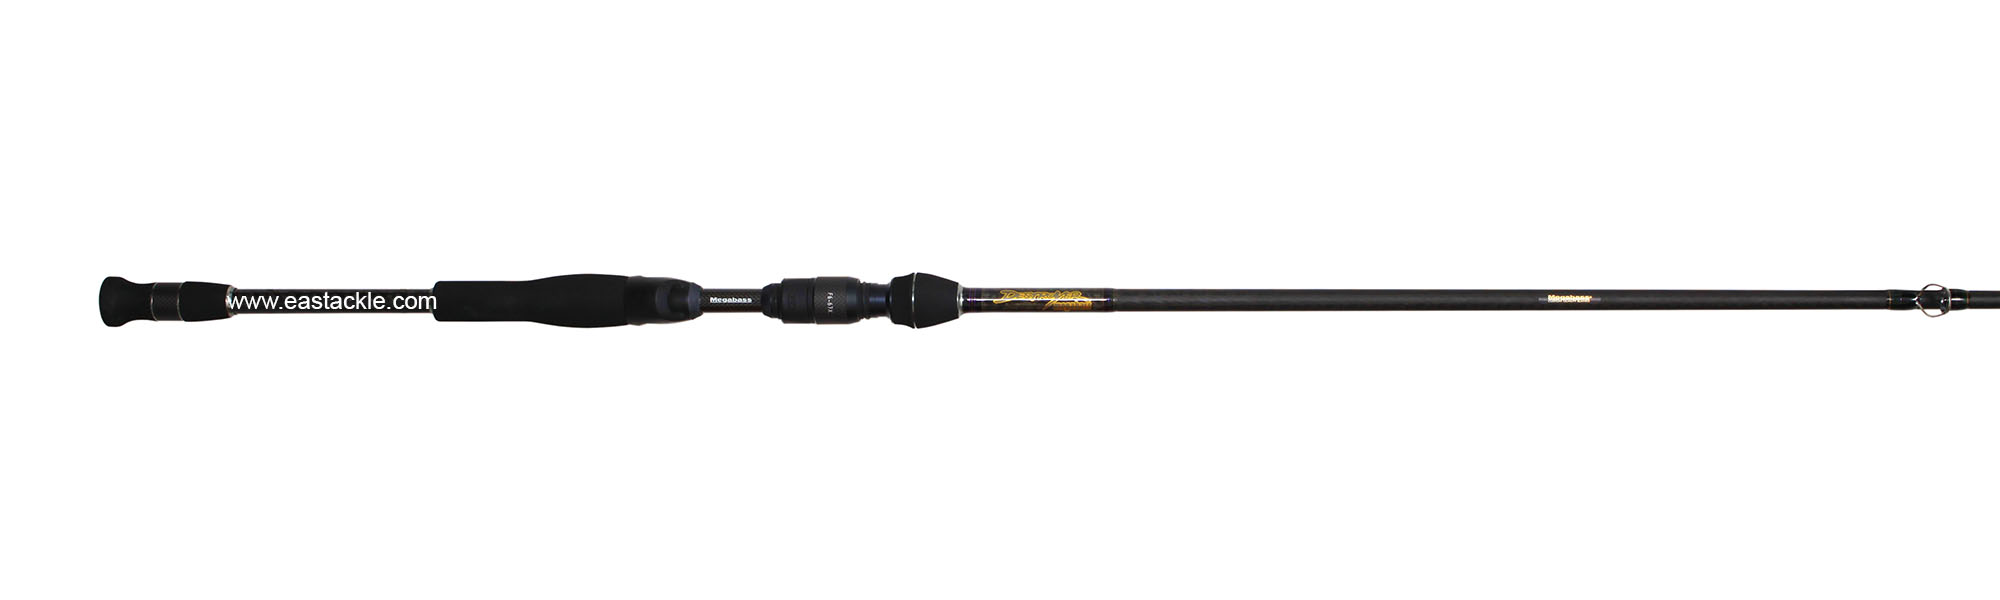 Megabass - Destroyer Phase 3 - F6-67X - G-AX - Bait Casting Rod - Butt to Stripper Guide (Top View) | Eastackle